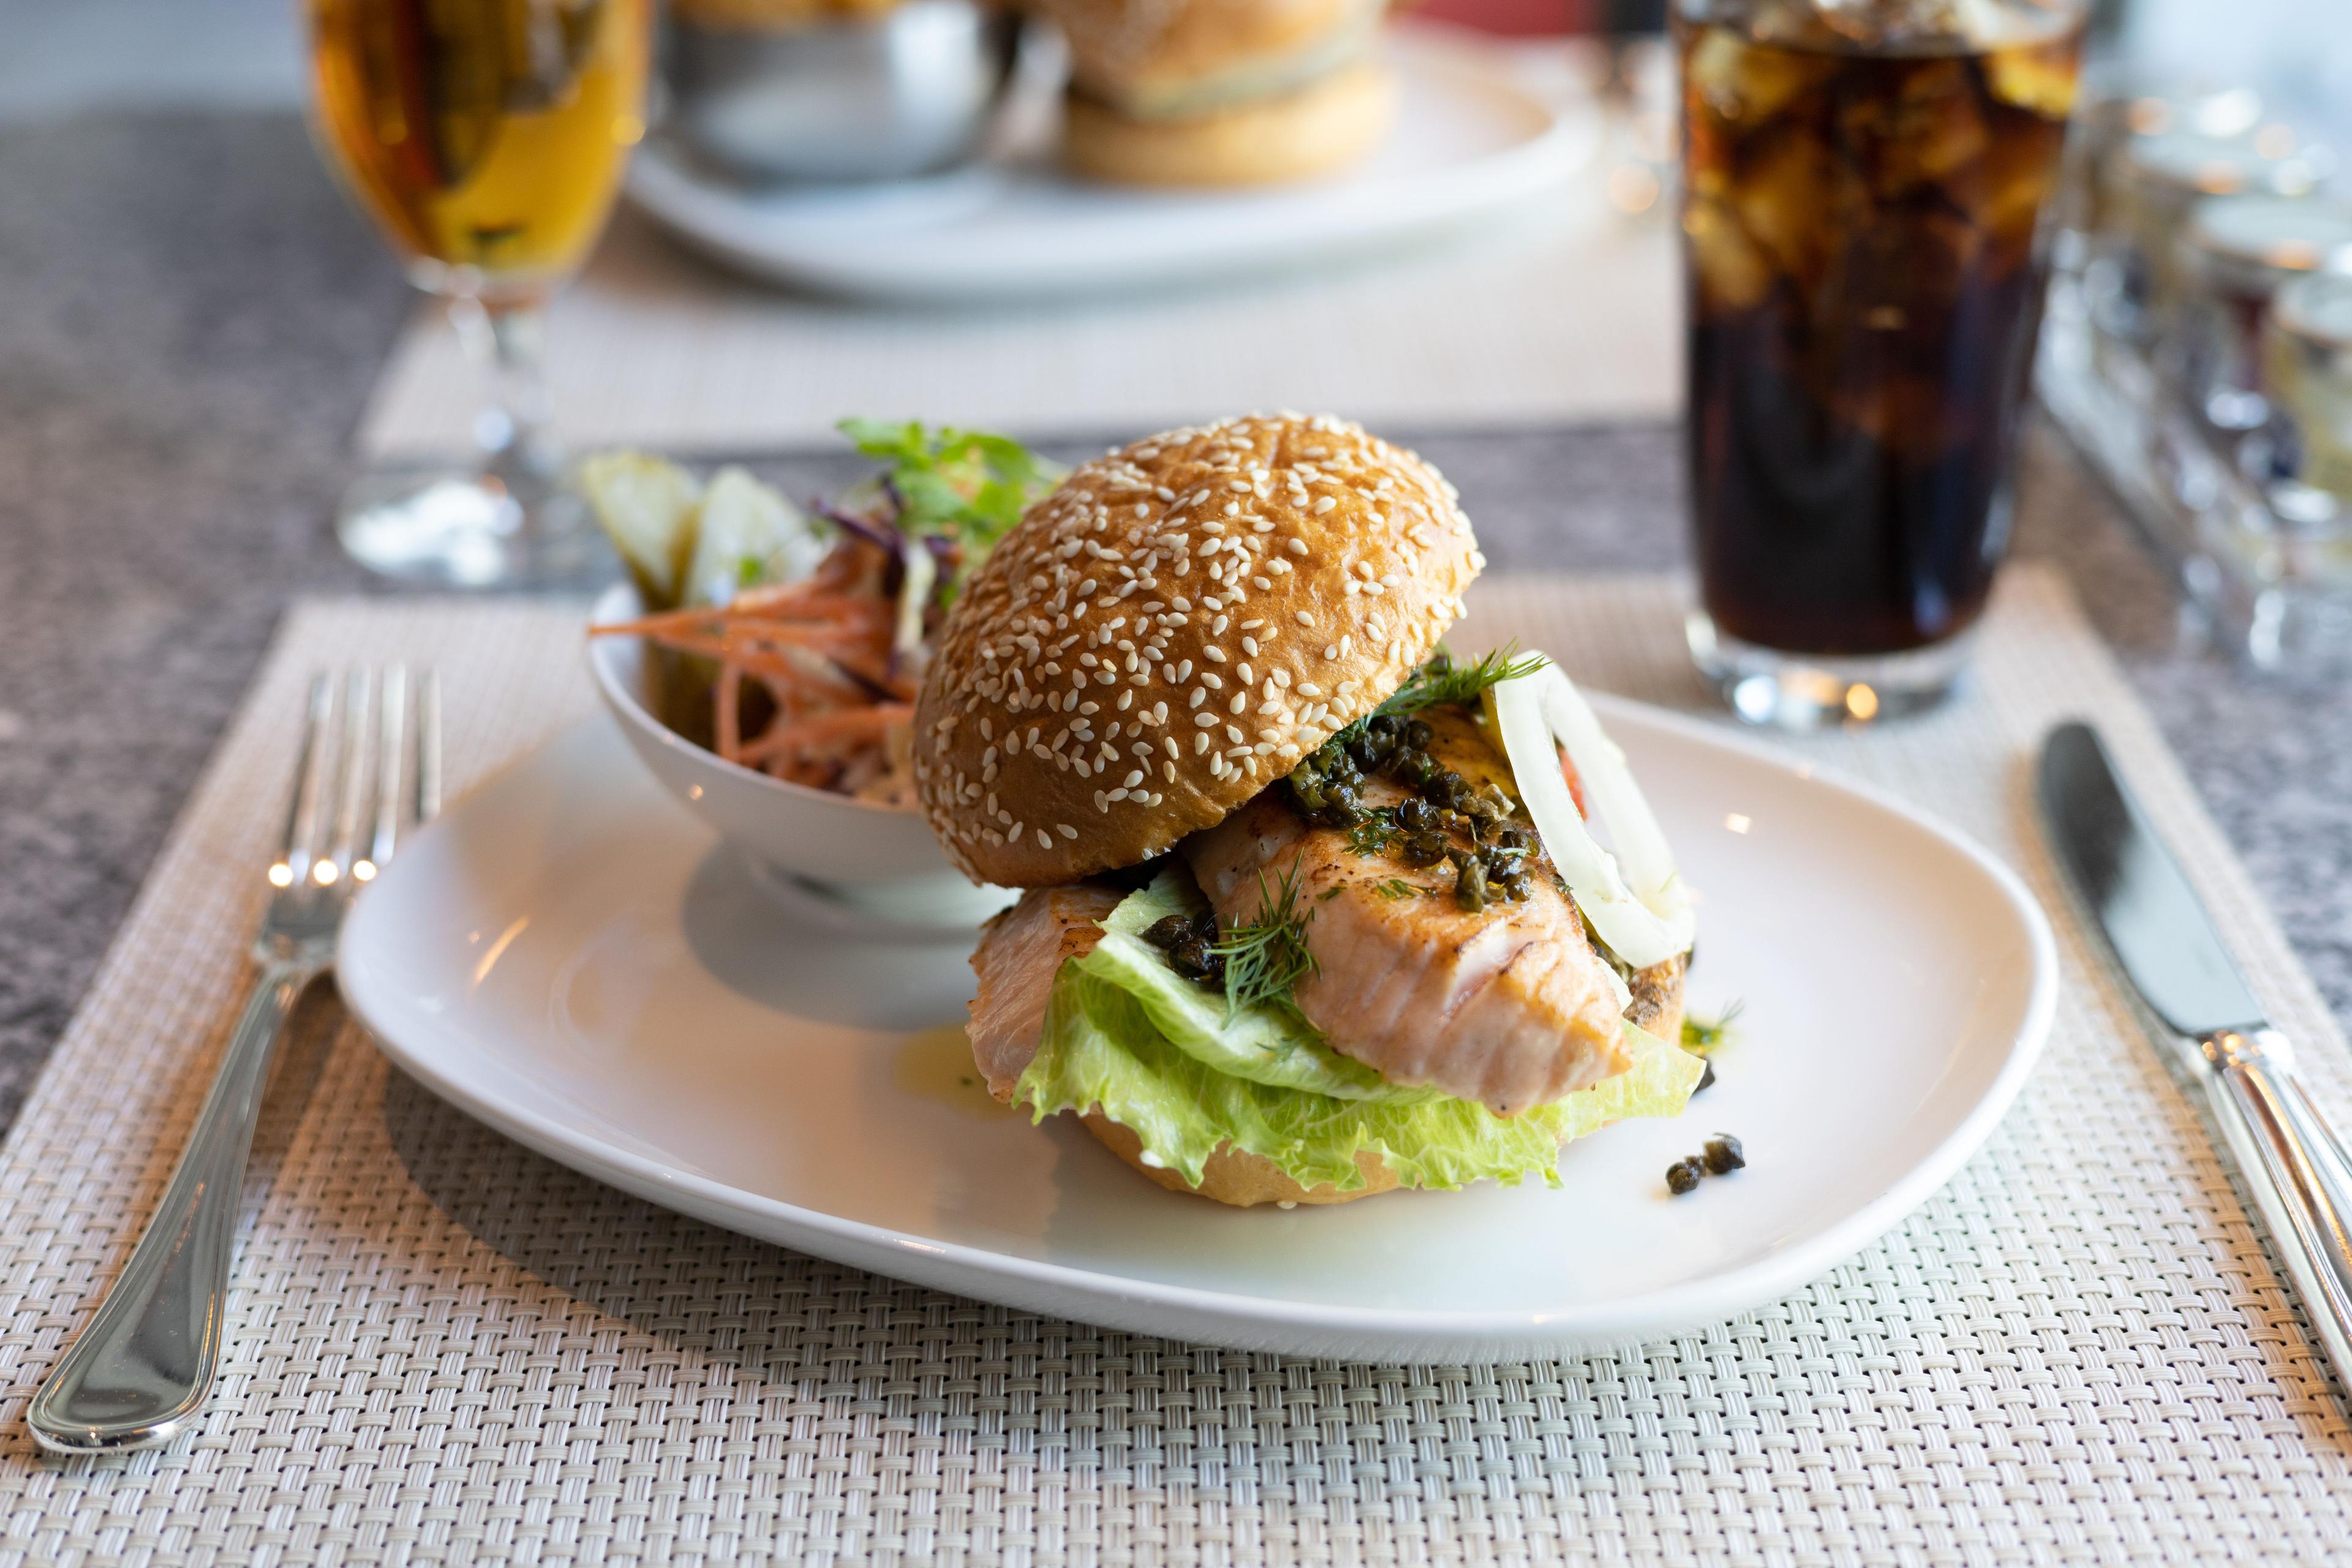 THE GRILLED SALMON BURGER